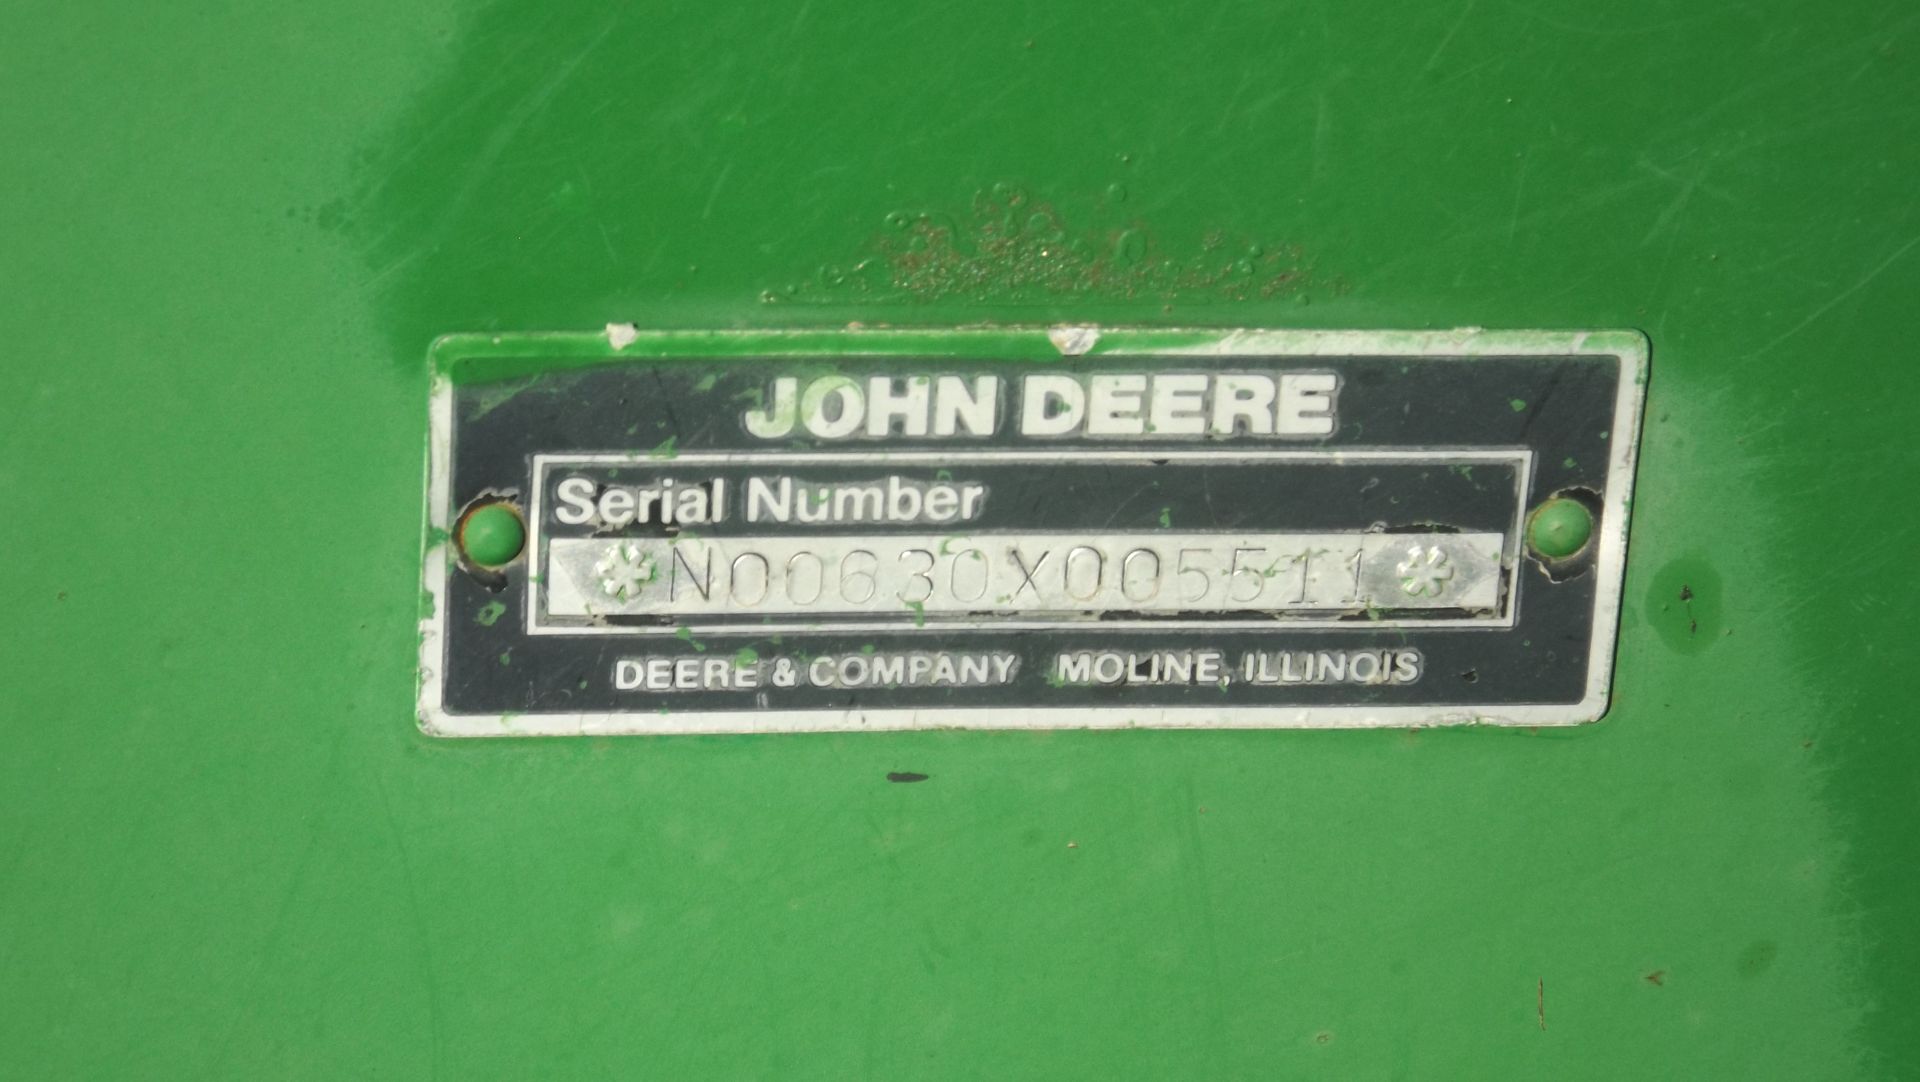 JD 630 Wing Disk, 28', 9" spacing, walking tandem axels, 21 1/2" front and 21 3/4" back blades, SN - Image 5 of 5